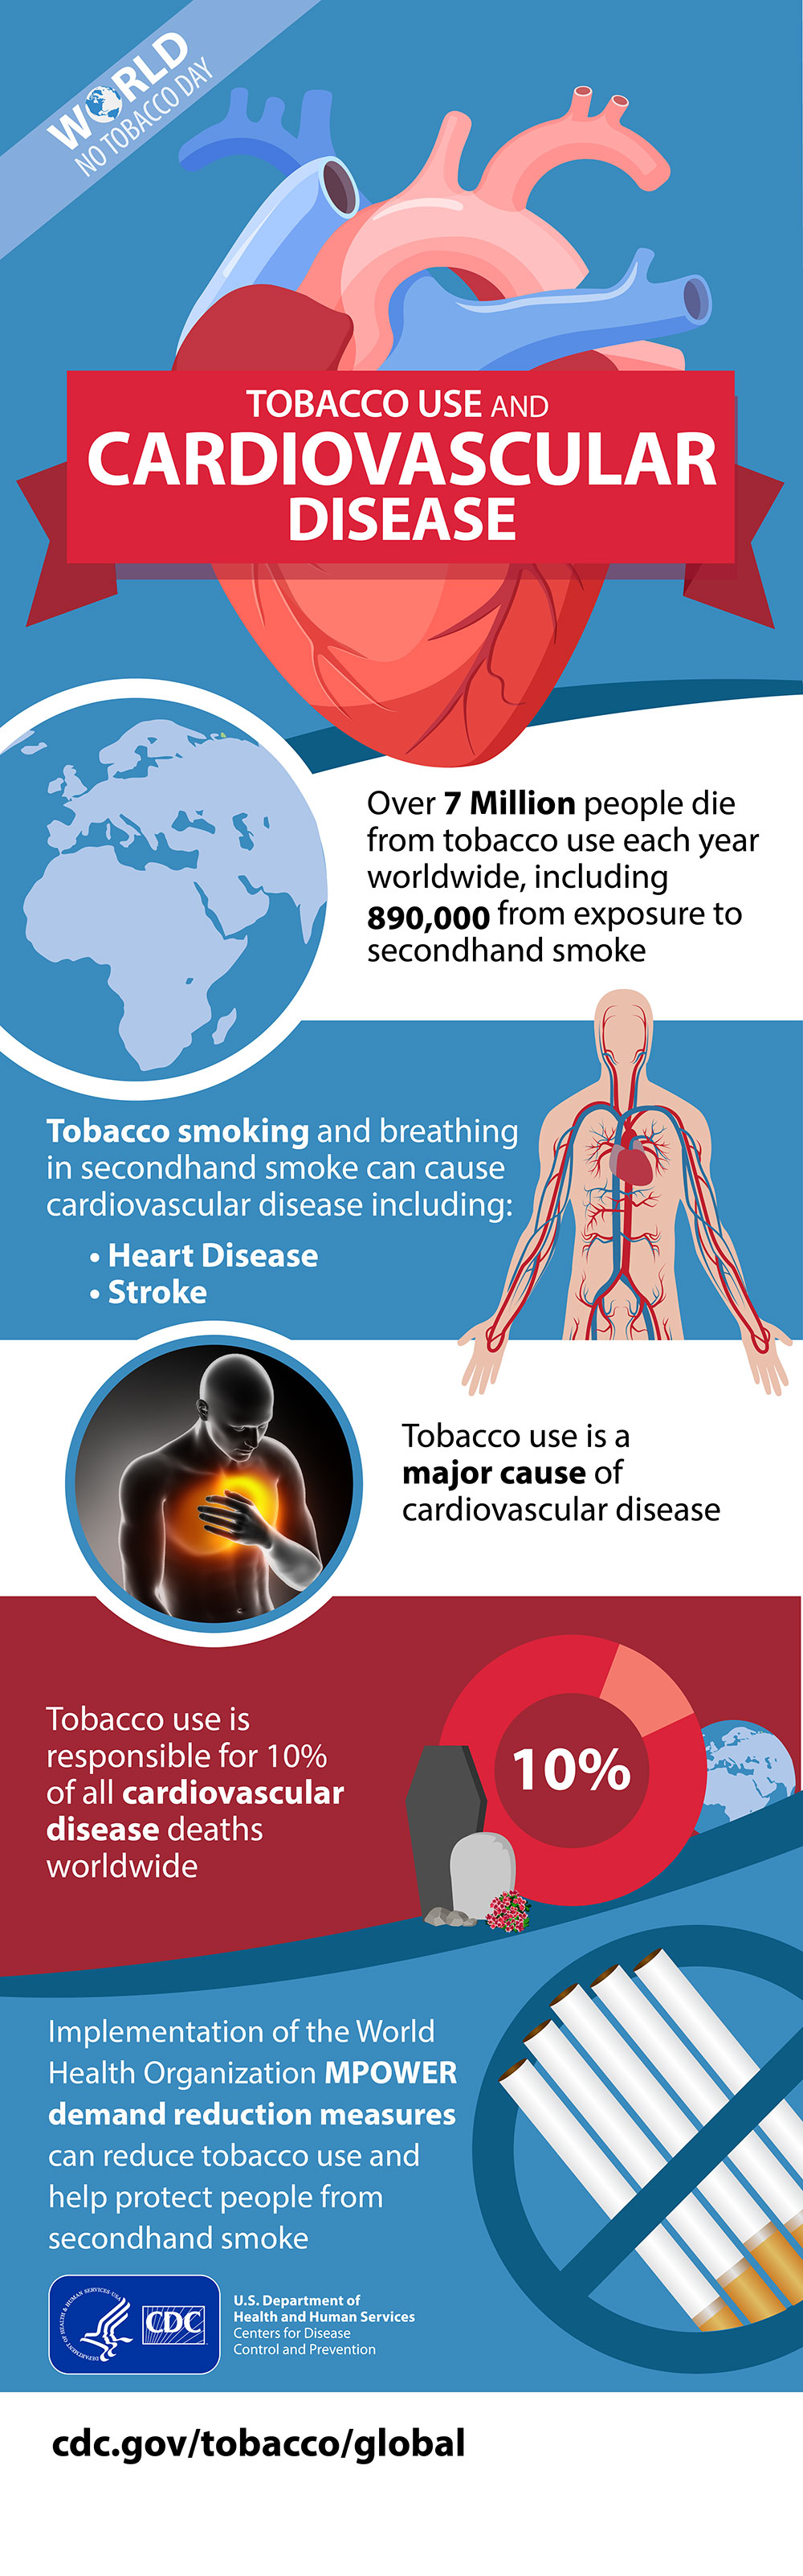 Tobacco Use and Cardiovascular Disease